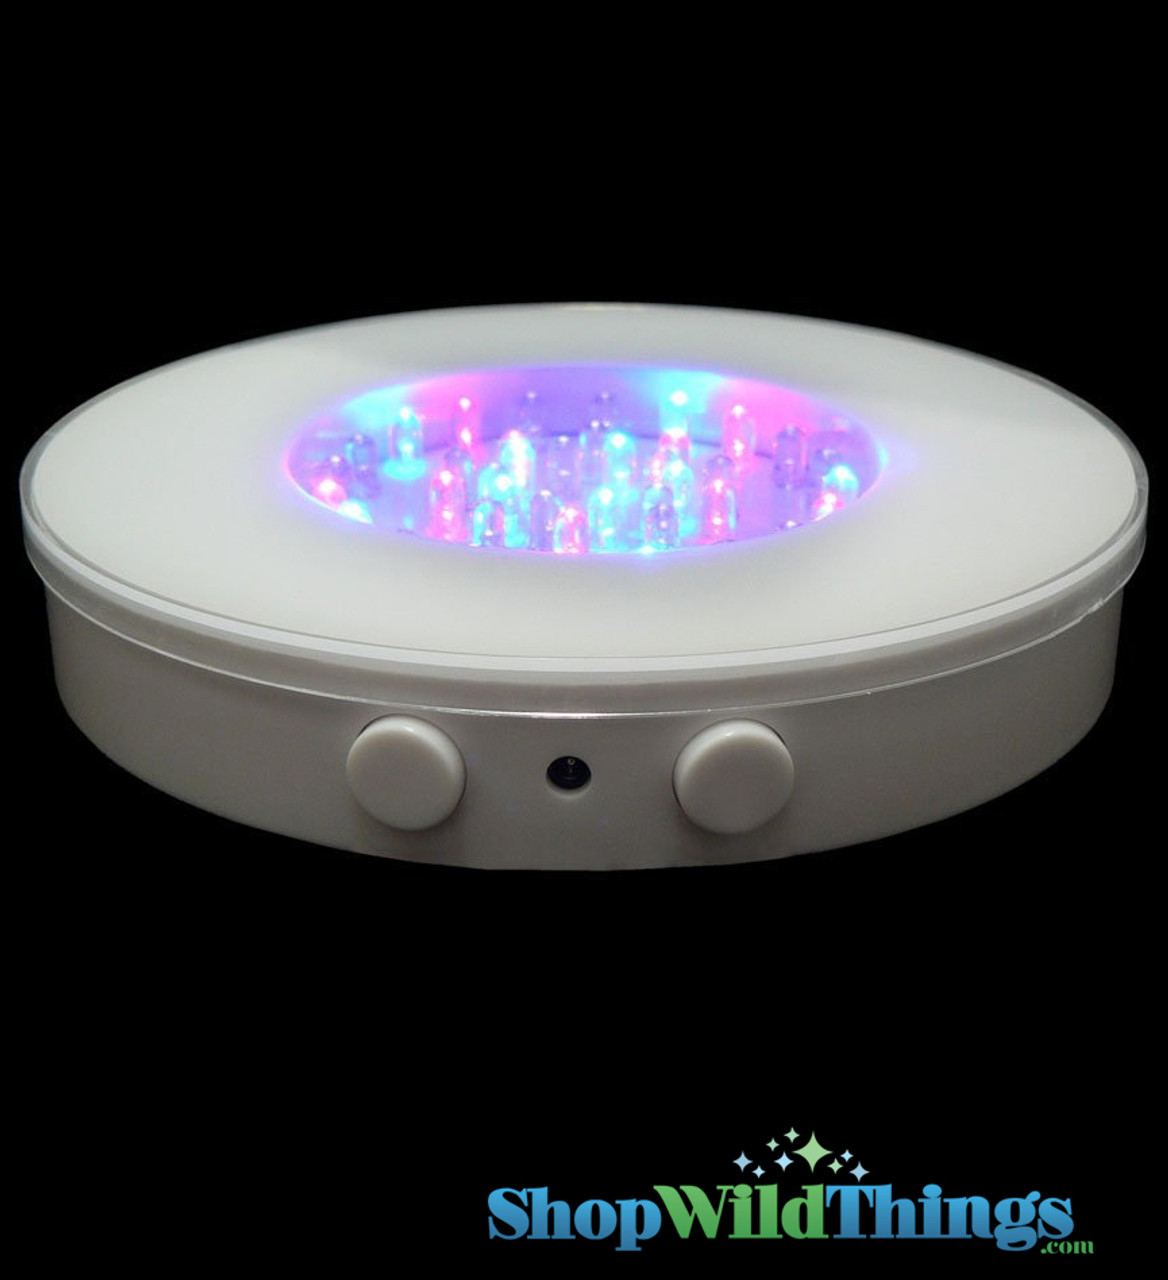 https://cdn11.bigcommerce.com/s-x1vm6a4952/images/stencil/1280x1280/products/8895/26131/white-base-6-super-bright-led-color-changing-or-just-white-light-base-77__98468.1588693015.jpg?c=2